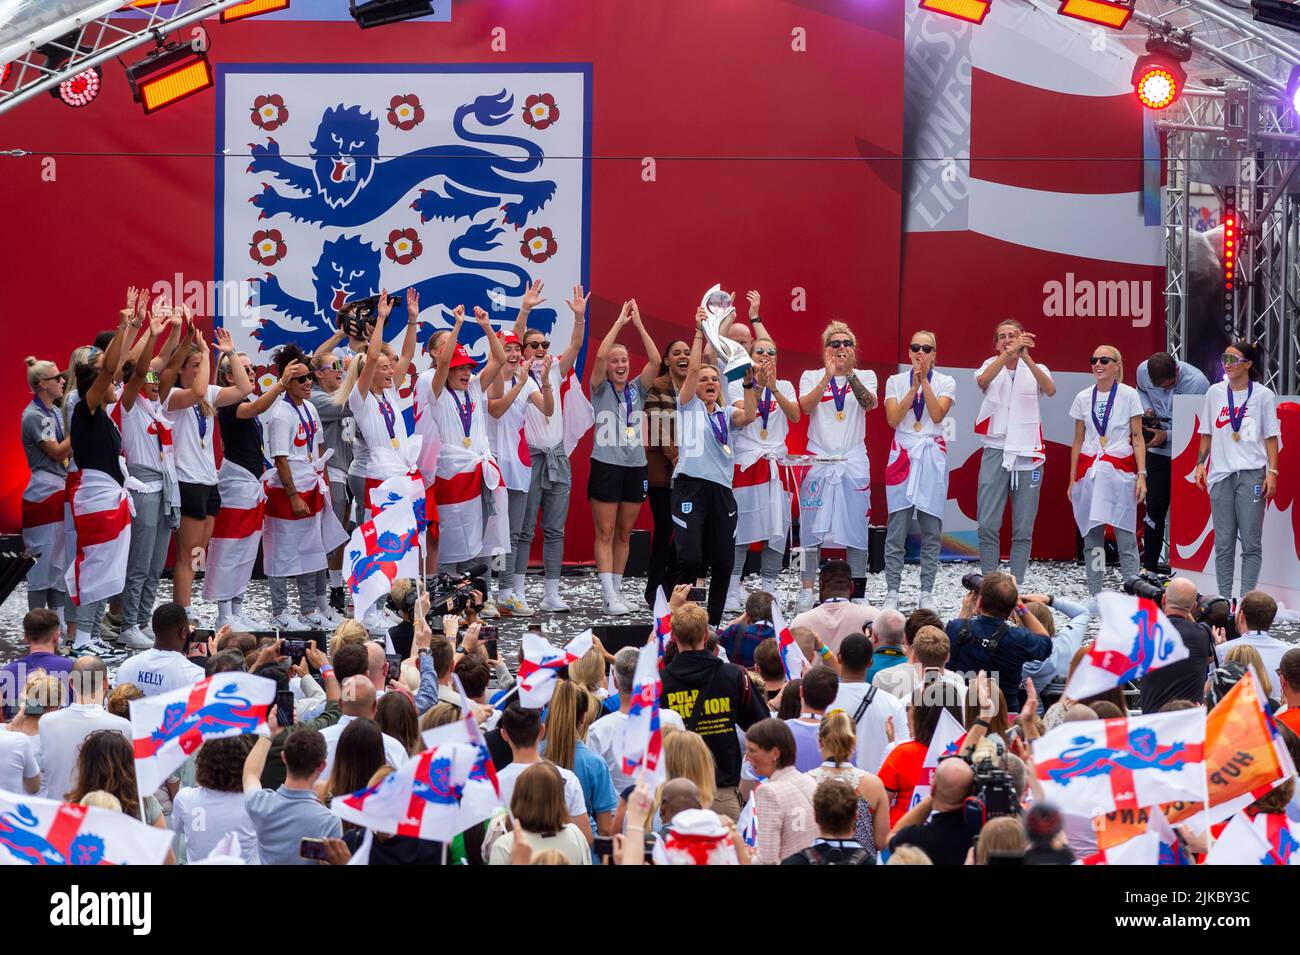 London, UK.  1 August 2022.  Members of the Women’s England football team and manager Sarina Wiegman, celebrate with 7,000 fans in Trafalgar Square after winning the European Championship final (Euro 2022) against Germany at Wembley Stadium the day before.  Credit: Stephen Chung / Alamy Live News Stock Photo